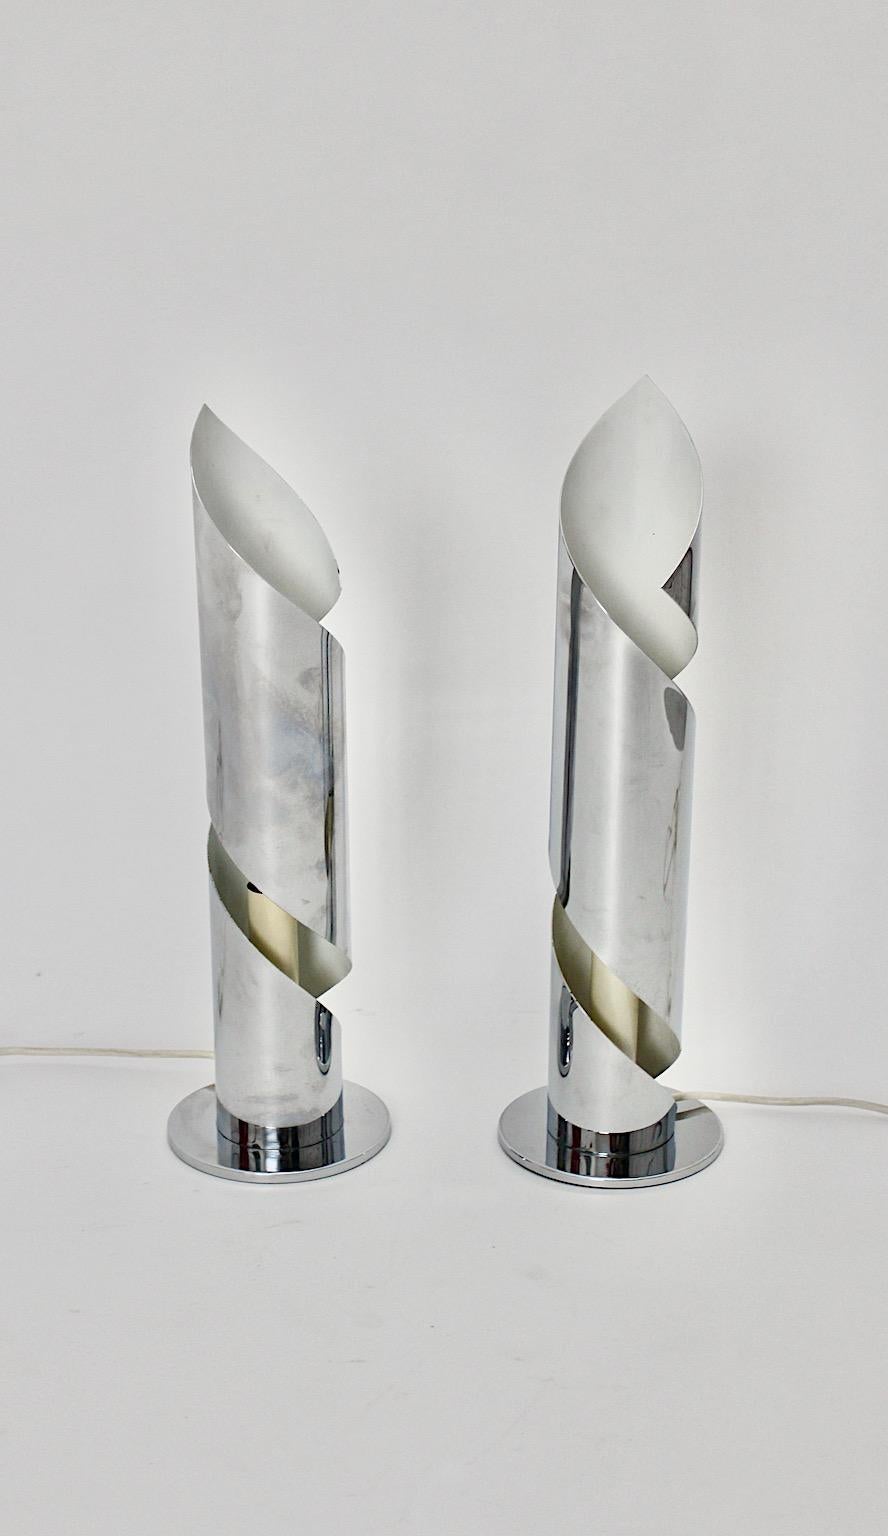 Space Age Vintage Silver Chromed Duo Pair Table Lamps, 1970s, Italy For Sale 1